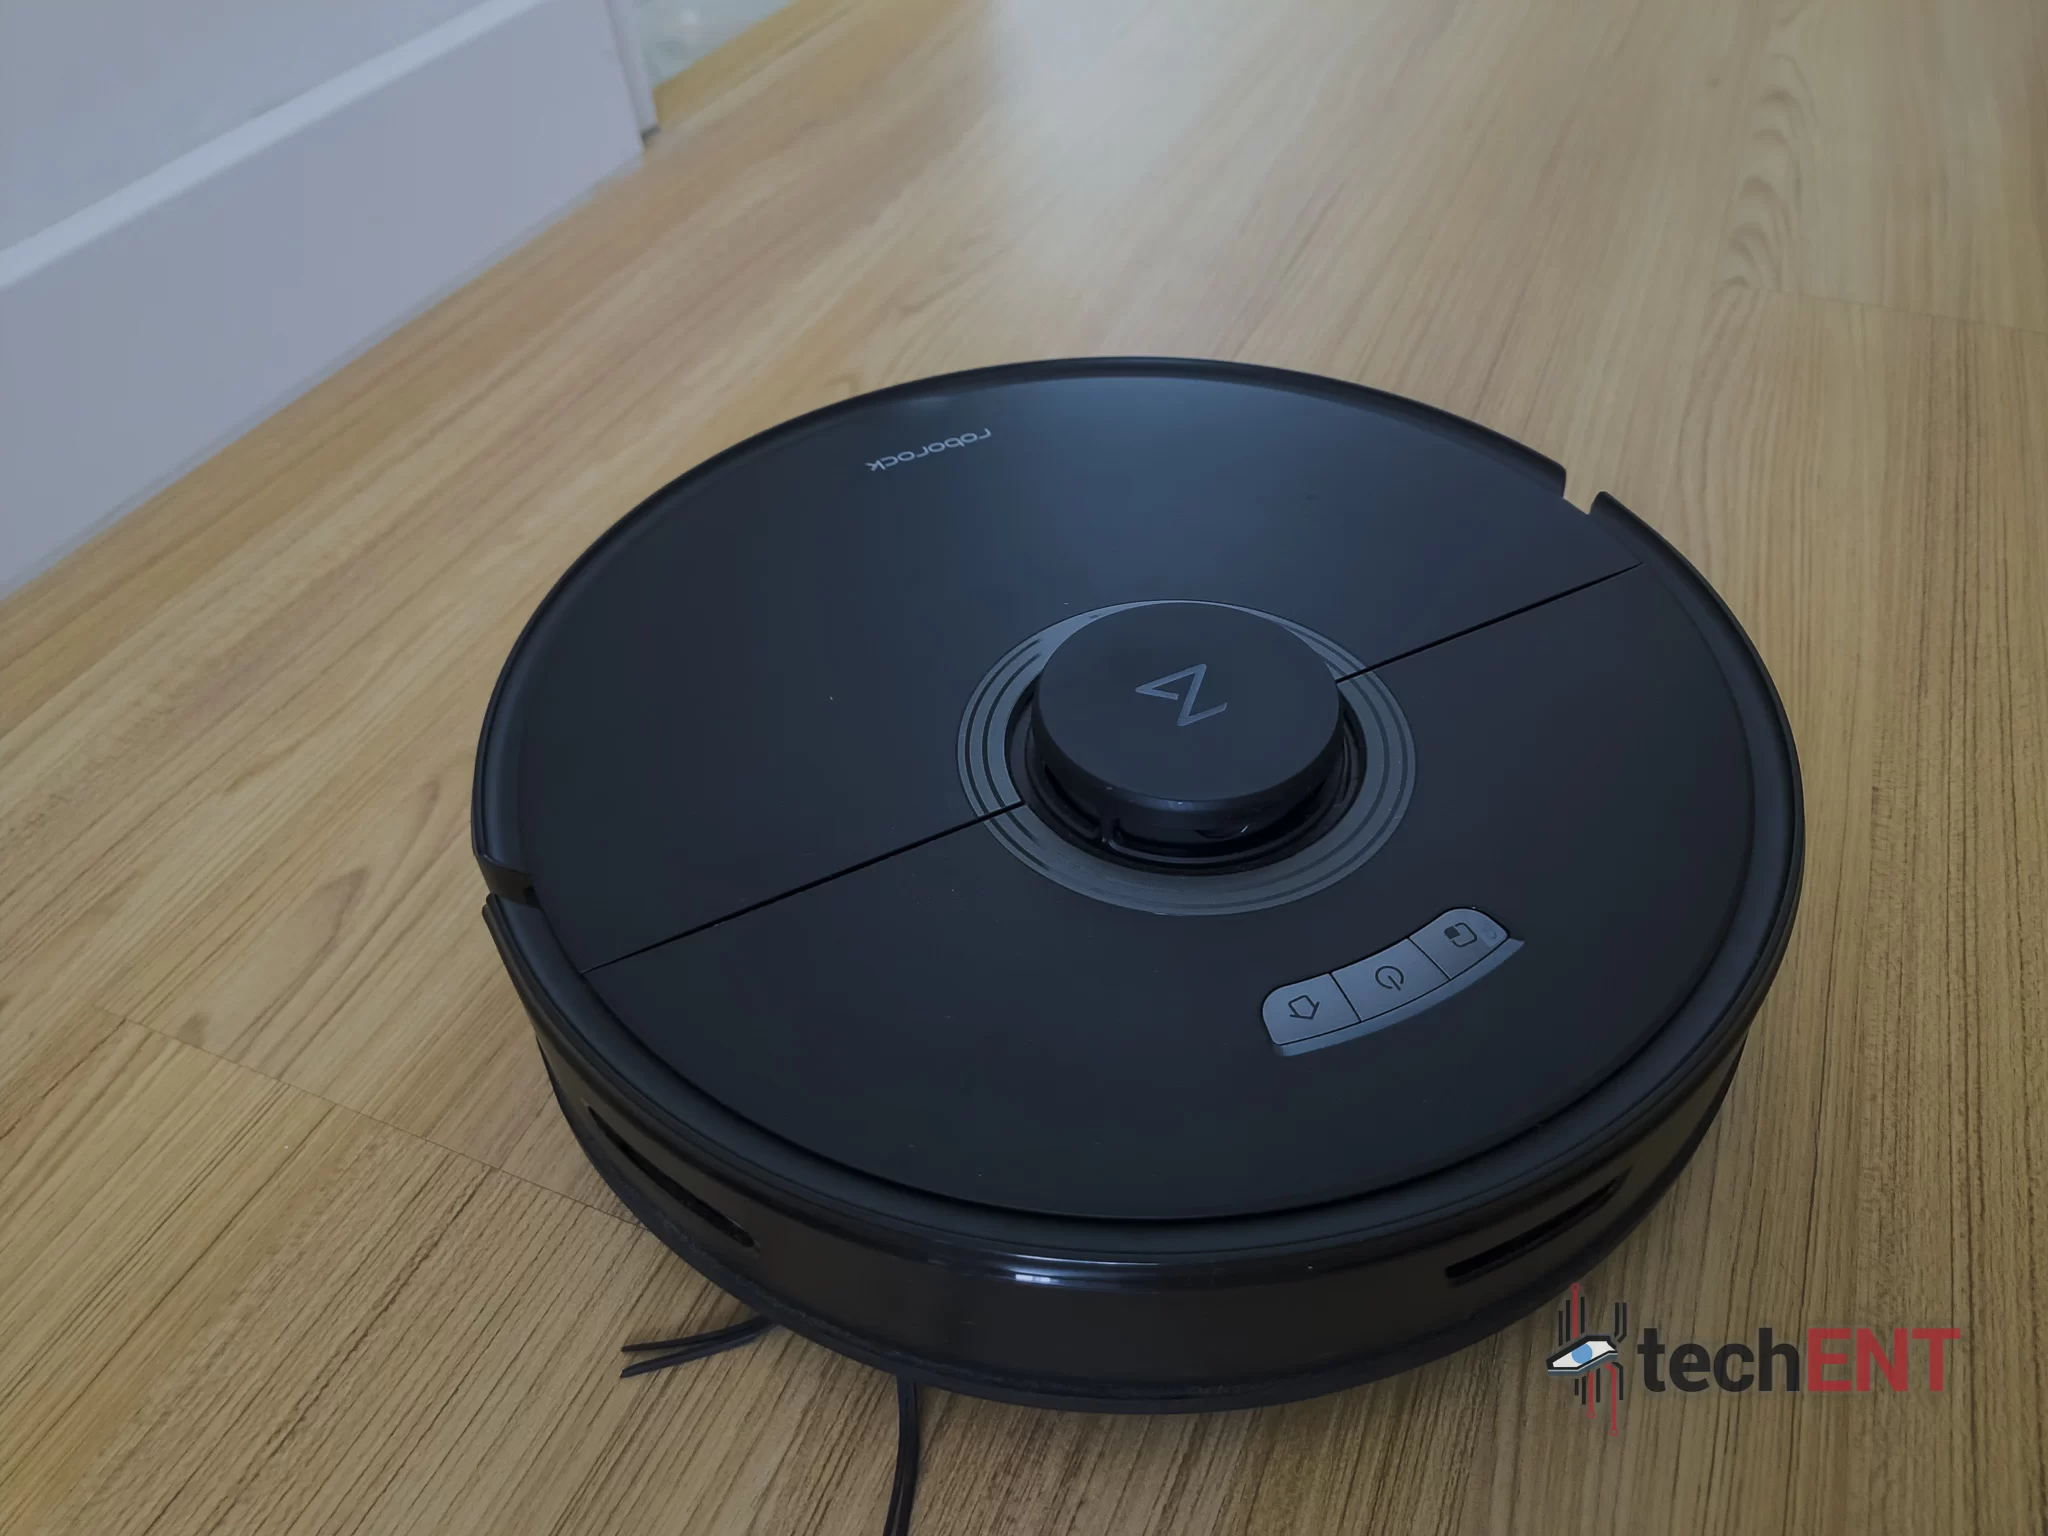 The Roborock Q7 Max+ In-Depth Review – Out of Sight, Out of Mind